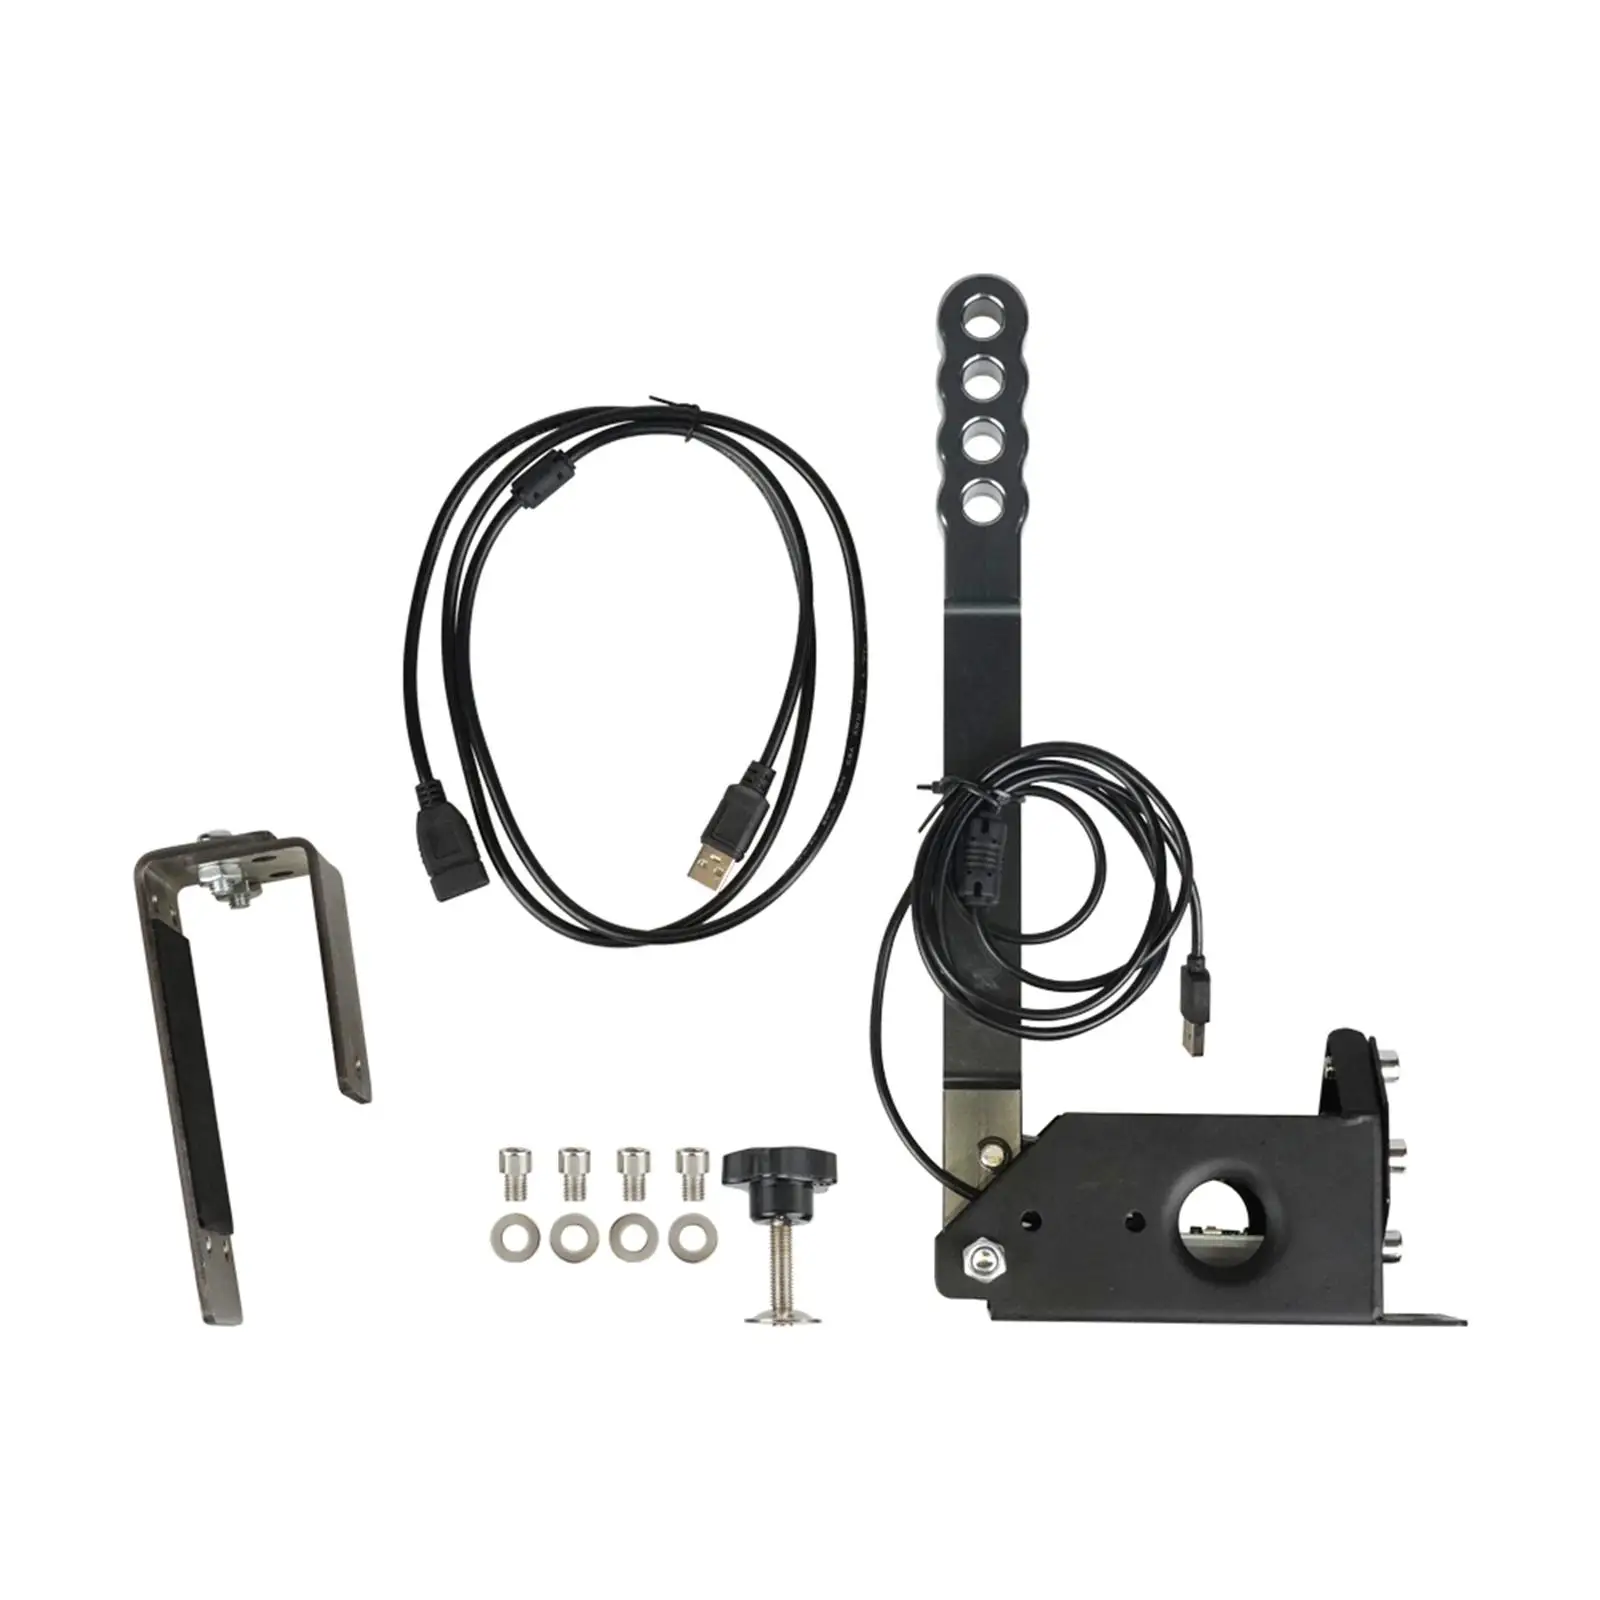 Handbrake Spare Parts 14 Bit Easy to Install Professional Durable Plug and Play for Logitech G29 G27 G25 PC